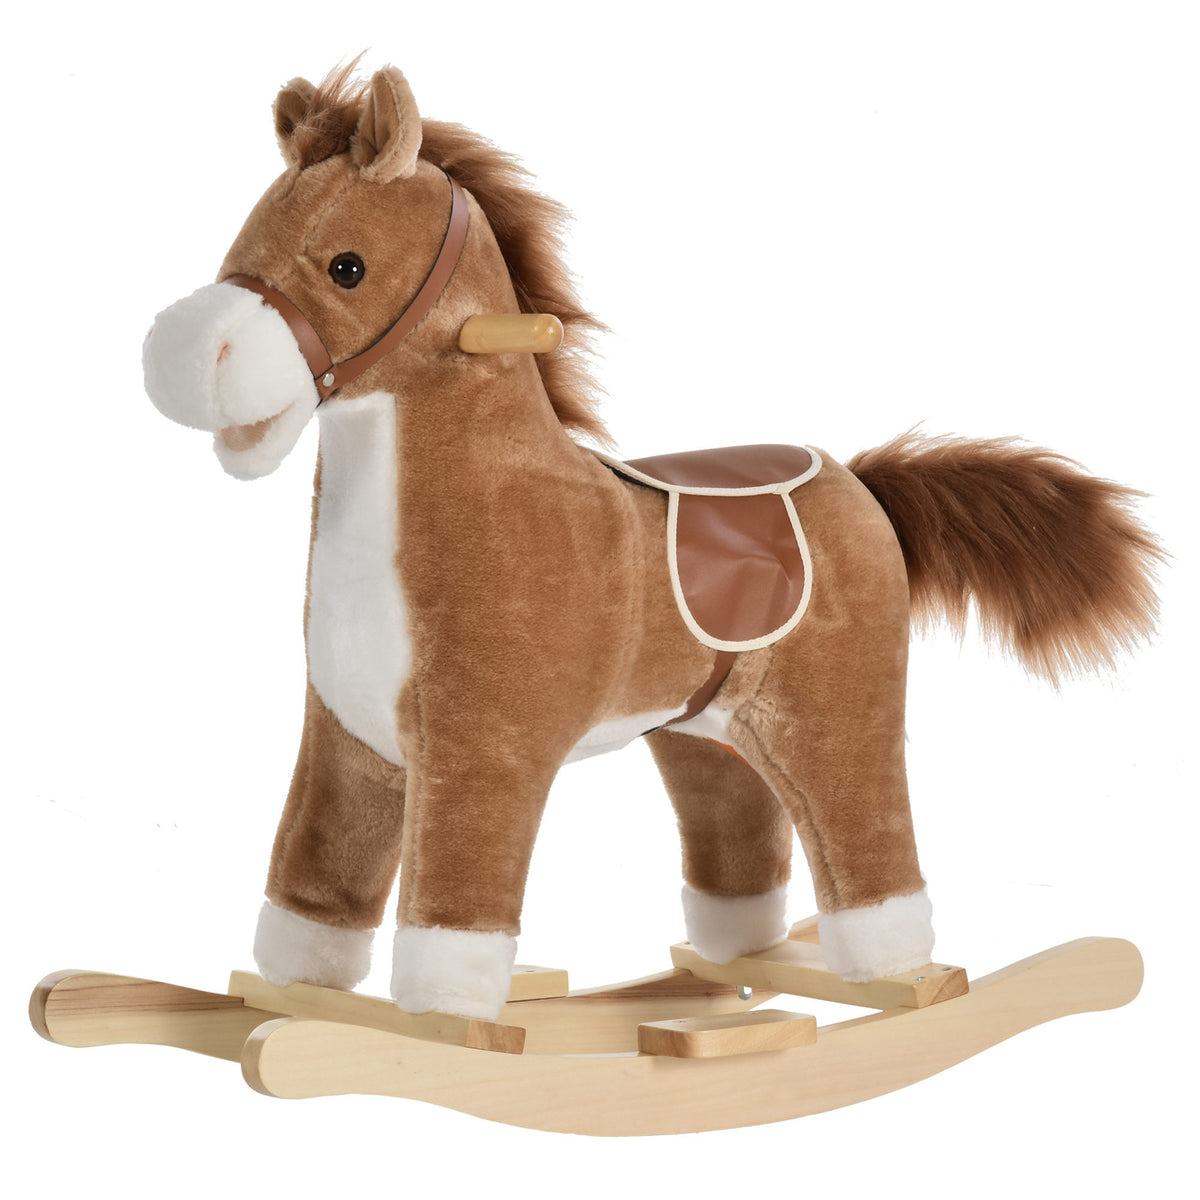 Rocking Horse Plush Animal on Wooden Rockers, Baby Rocking Chair with Sounds, Moving Mouth, Wagging Tail, Brown